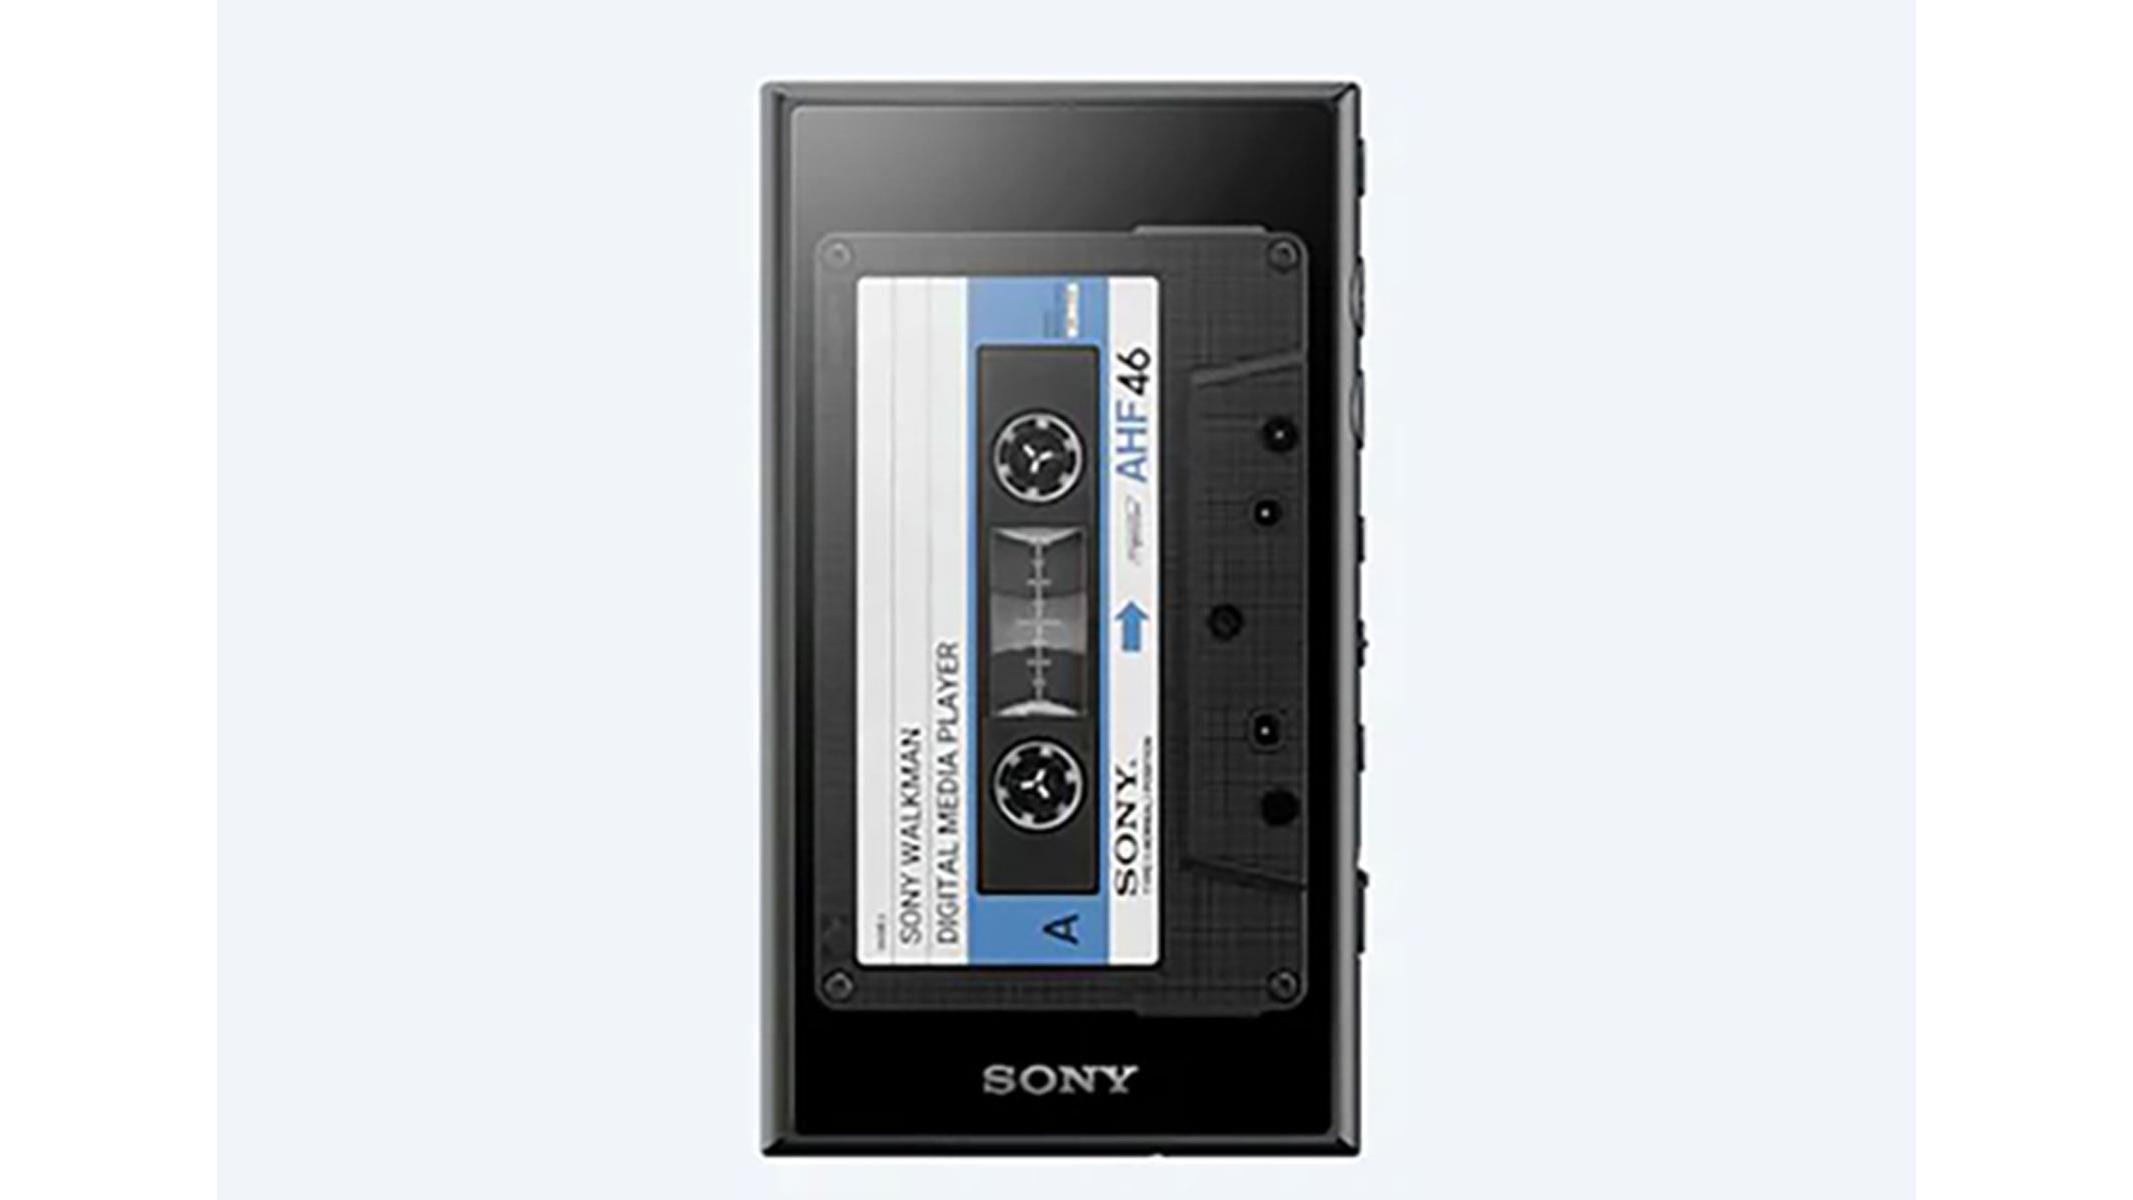 Sony's 40th Anniversary Walkman Released With Iconic Look And